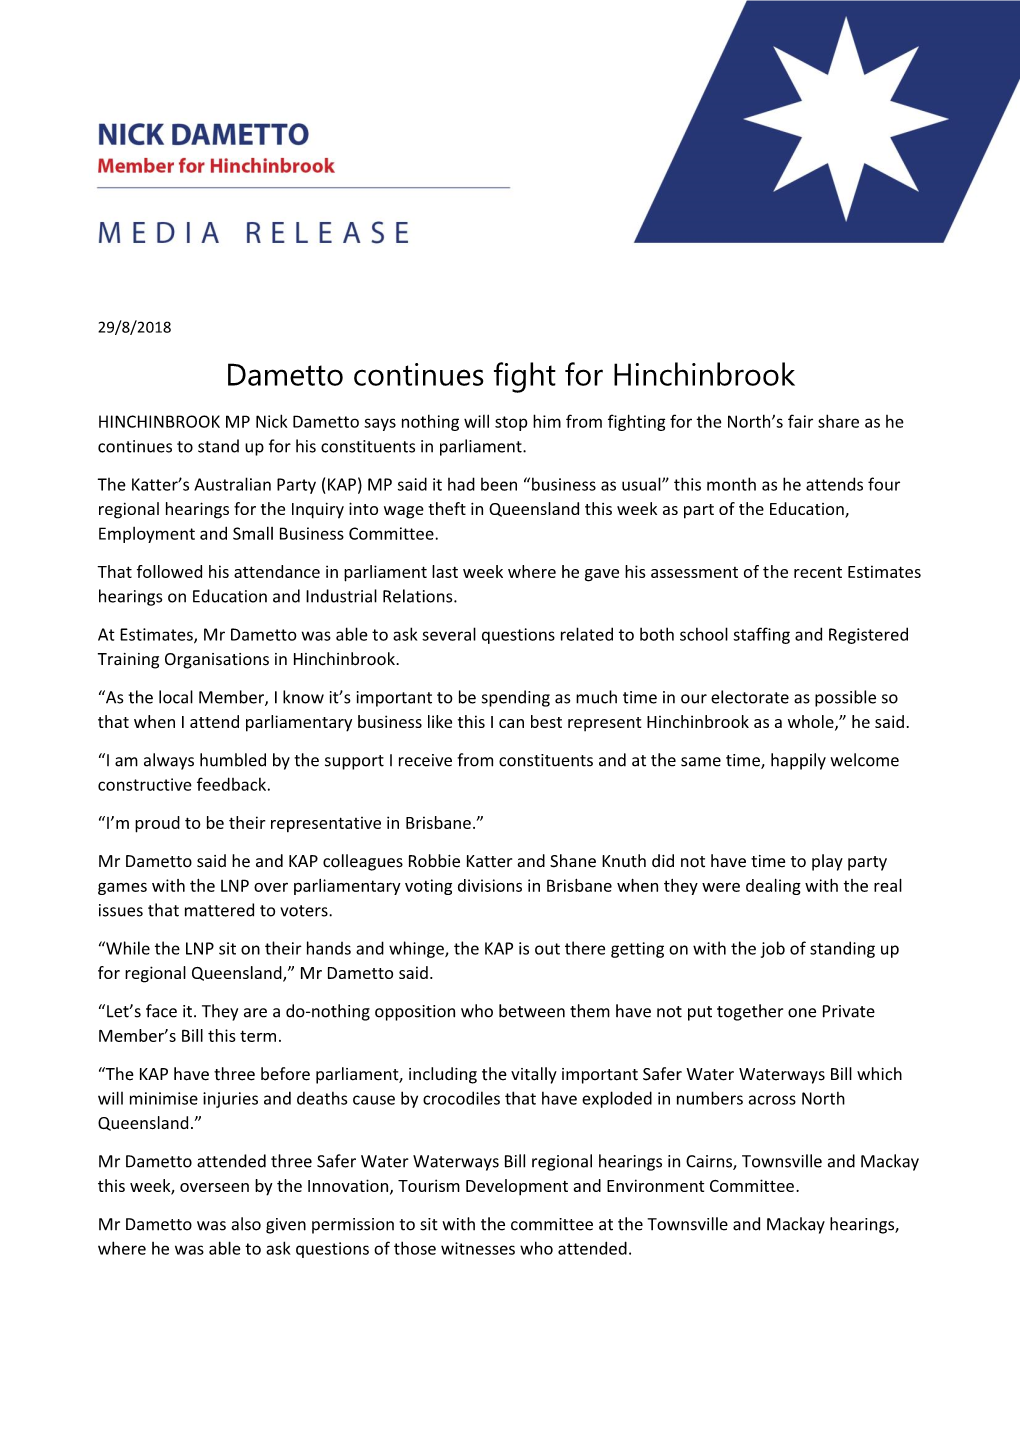 Dametto Continues Fight for Hinchinbrook